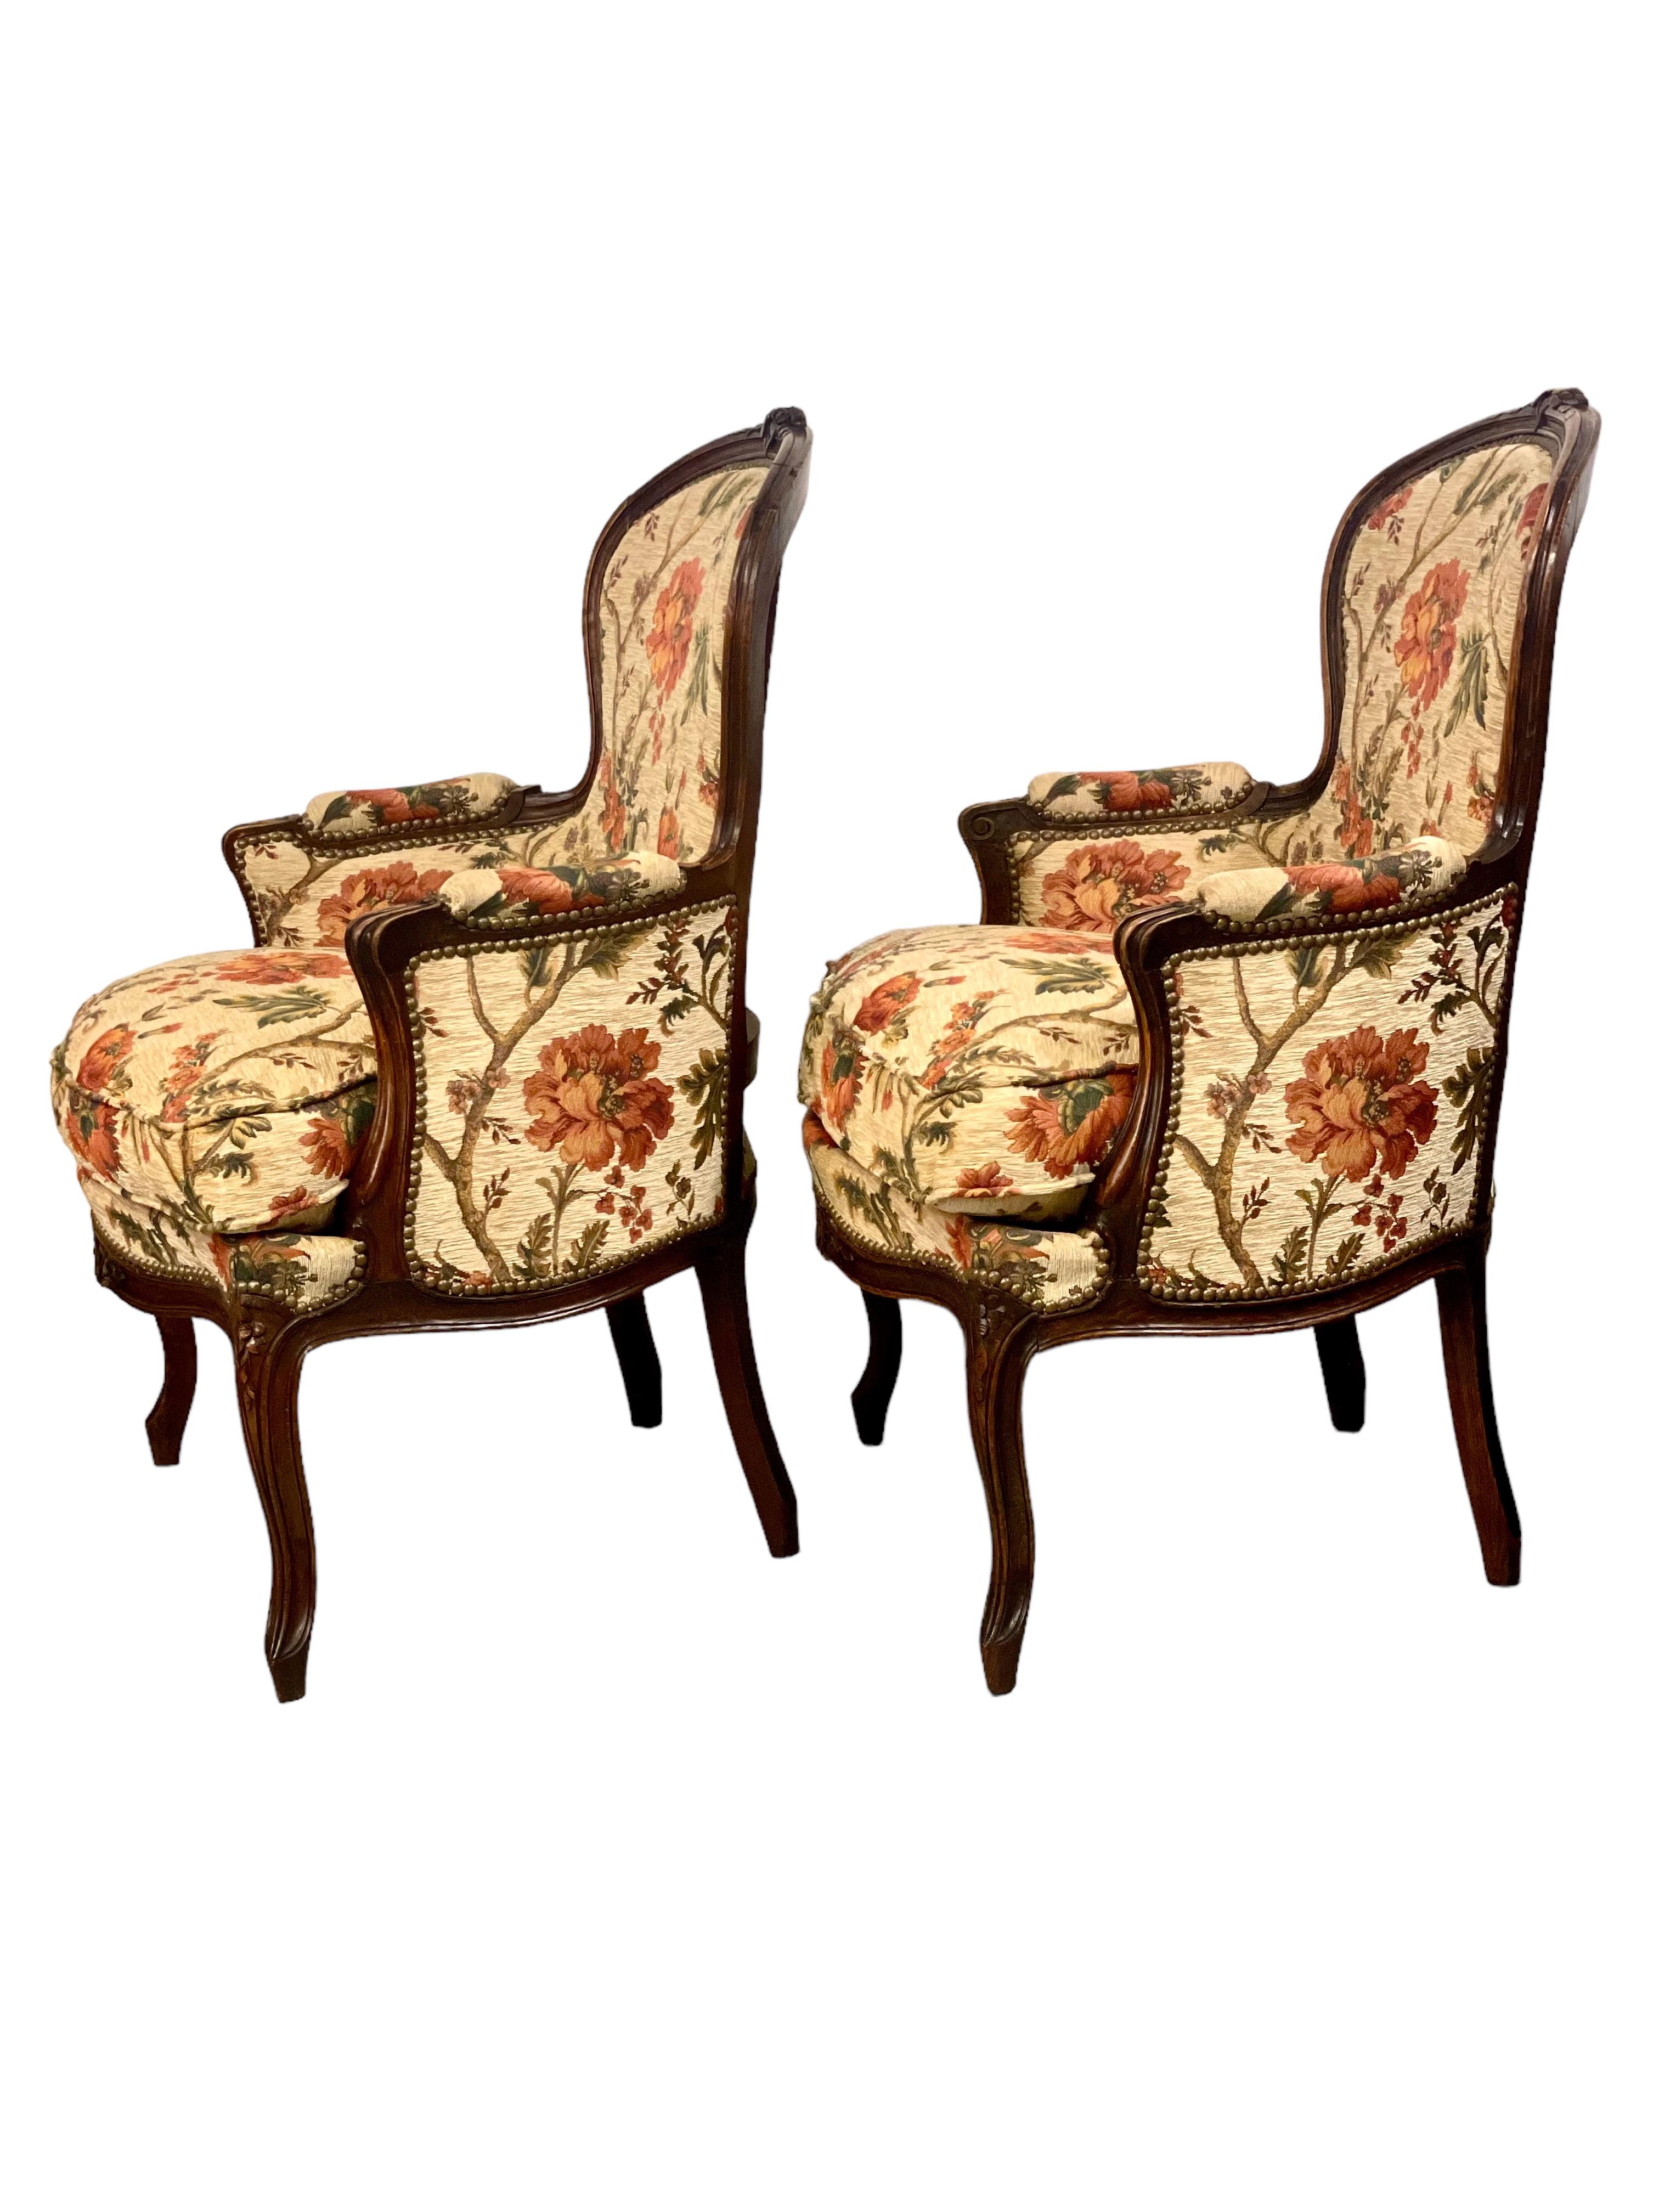 A matching pair of elegant and extremely comfortable Louis XV style 'Bergère' armchairs, upholstered in a luxurious woven floral fabric in warm shades of apricot, terracotta and green set against a cream background. 
The curving wooden frames are